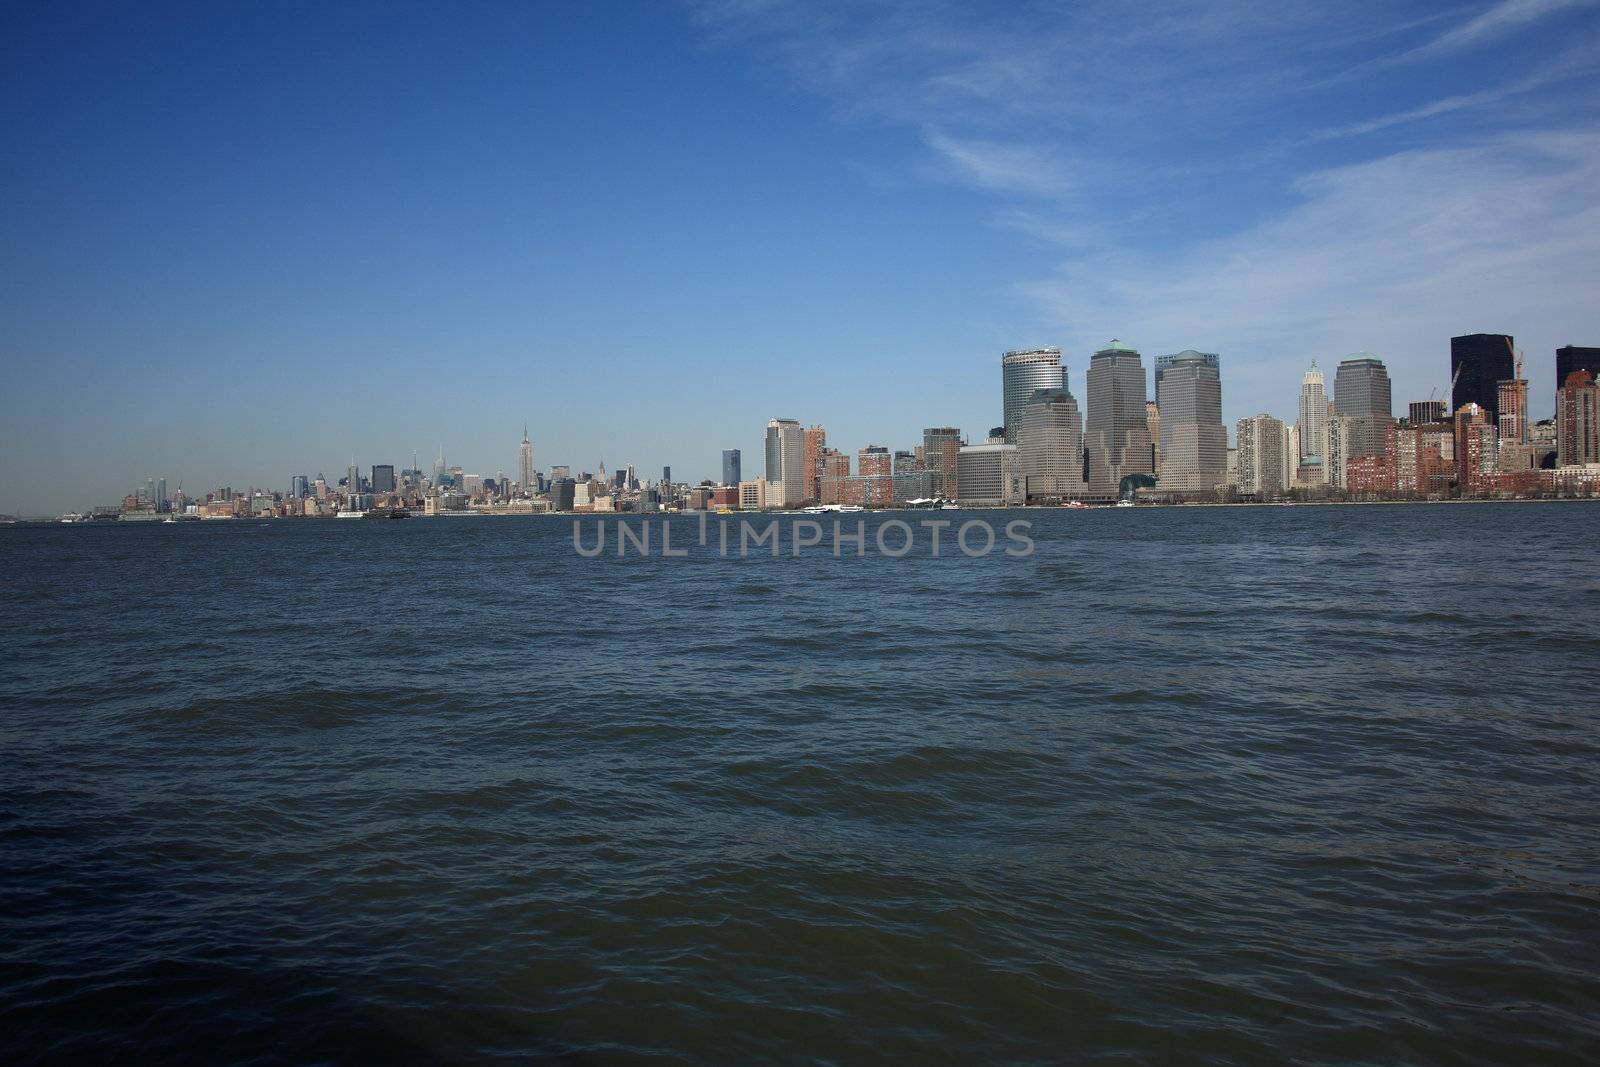 NYC skyline as seen from across the Hudson River in New Jersey